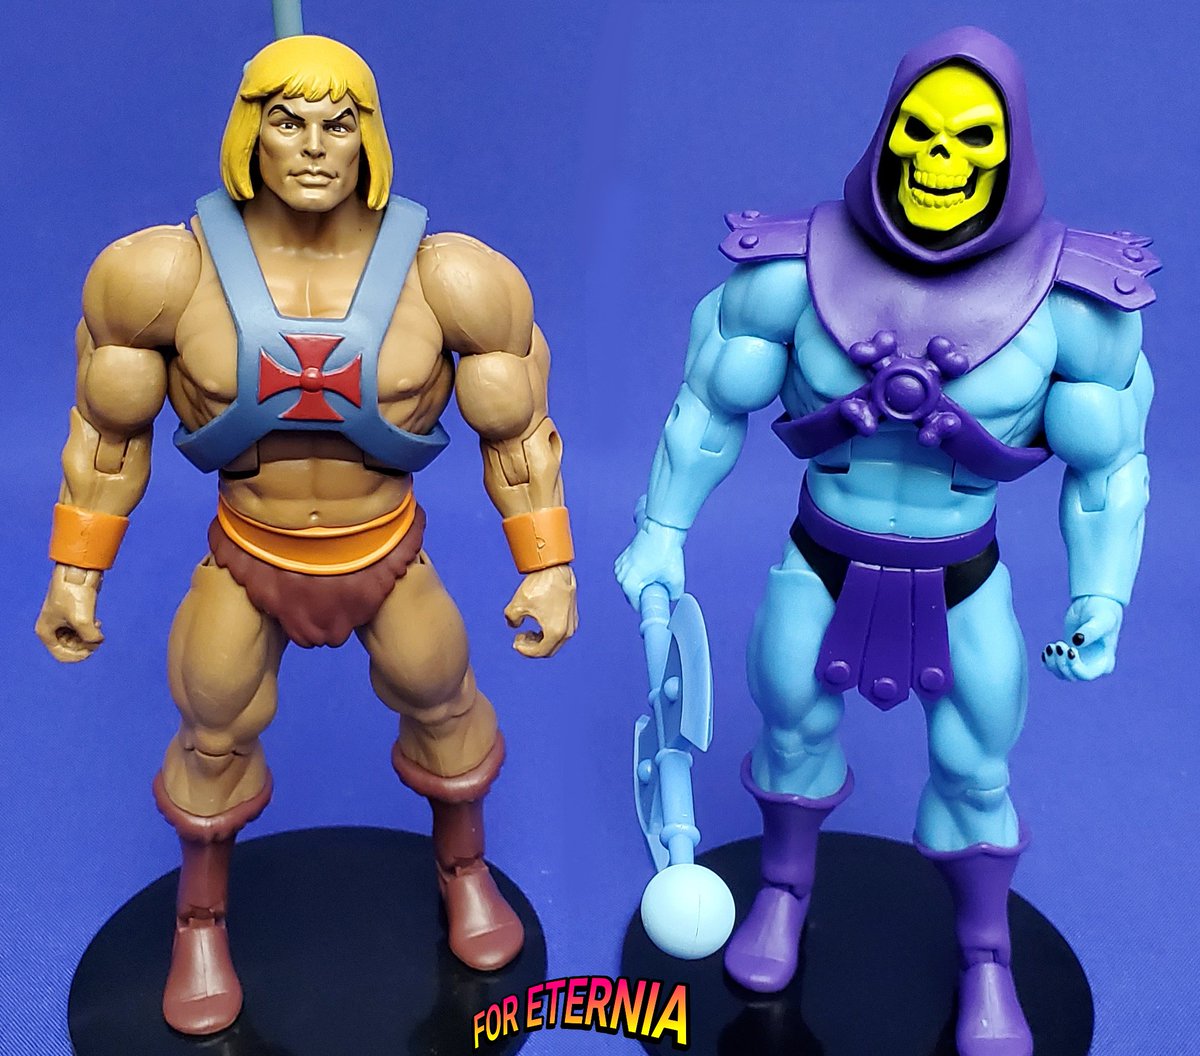 FEELING the FILMATION FEVER with the Mattel Masters of the Universe Classics 'Club Grayskull' He-Man and Super7 Masters of The Universe Ultimates 'Club Grayskull' Skeletor action figures. #MastersoftheUniverse #MOTU #Actionfigures